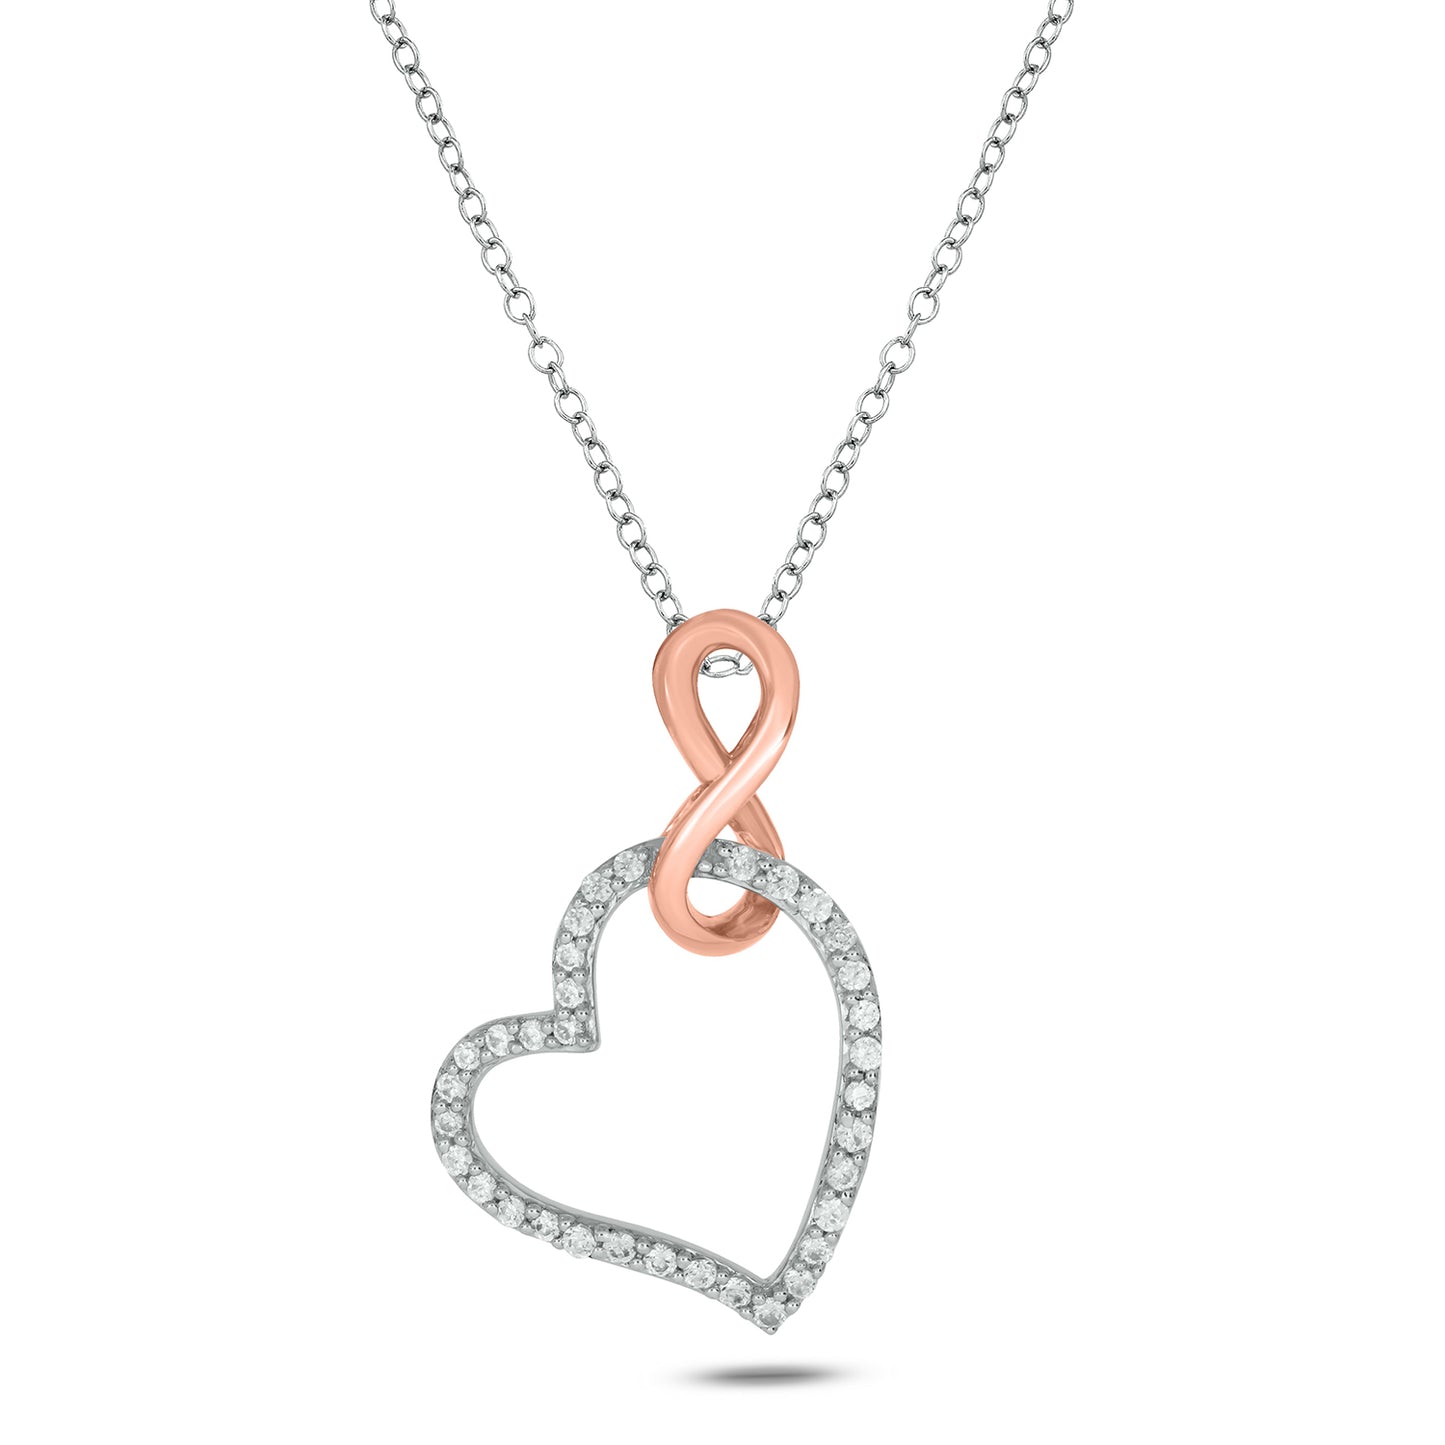 Minimal & Glamourous Diamond Infinity Heart Necklace Pendant in 925 Sterling Silver